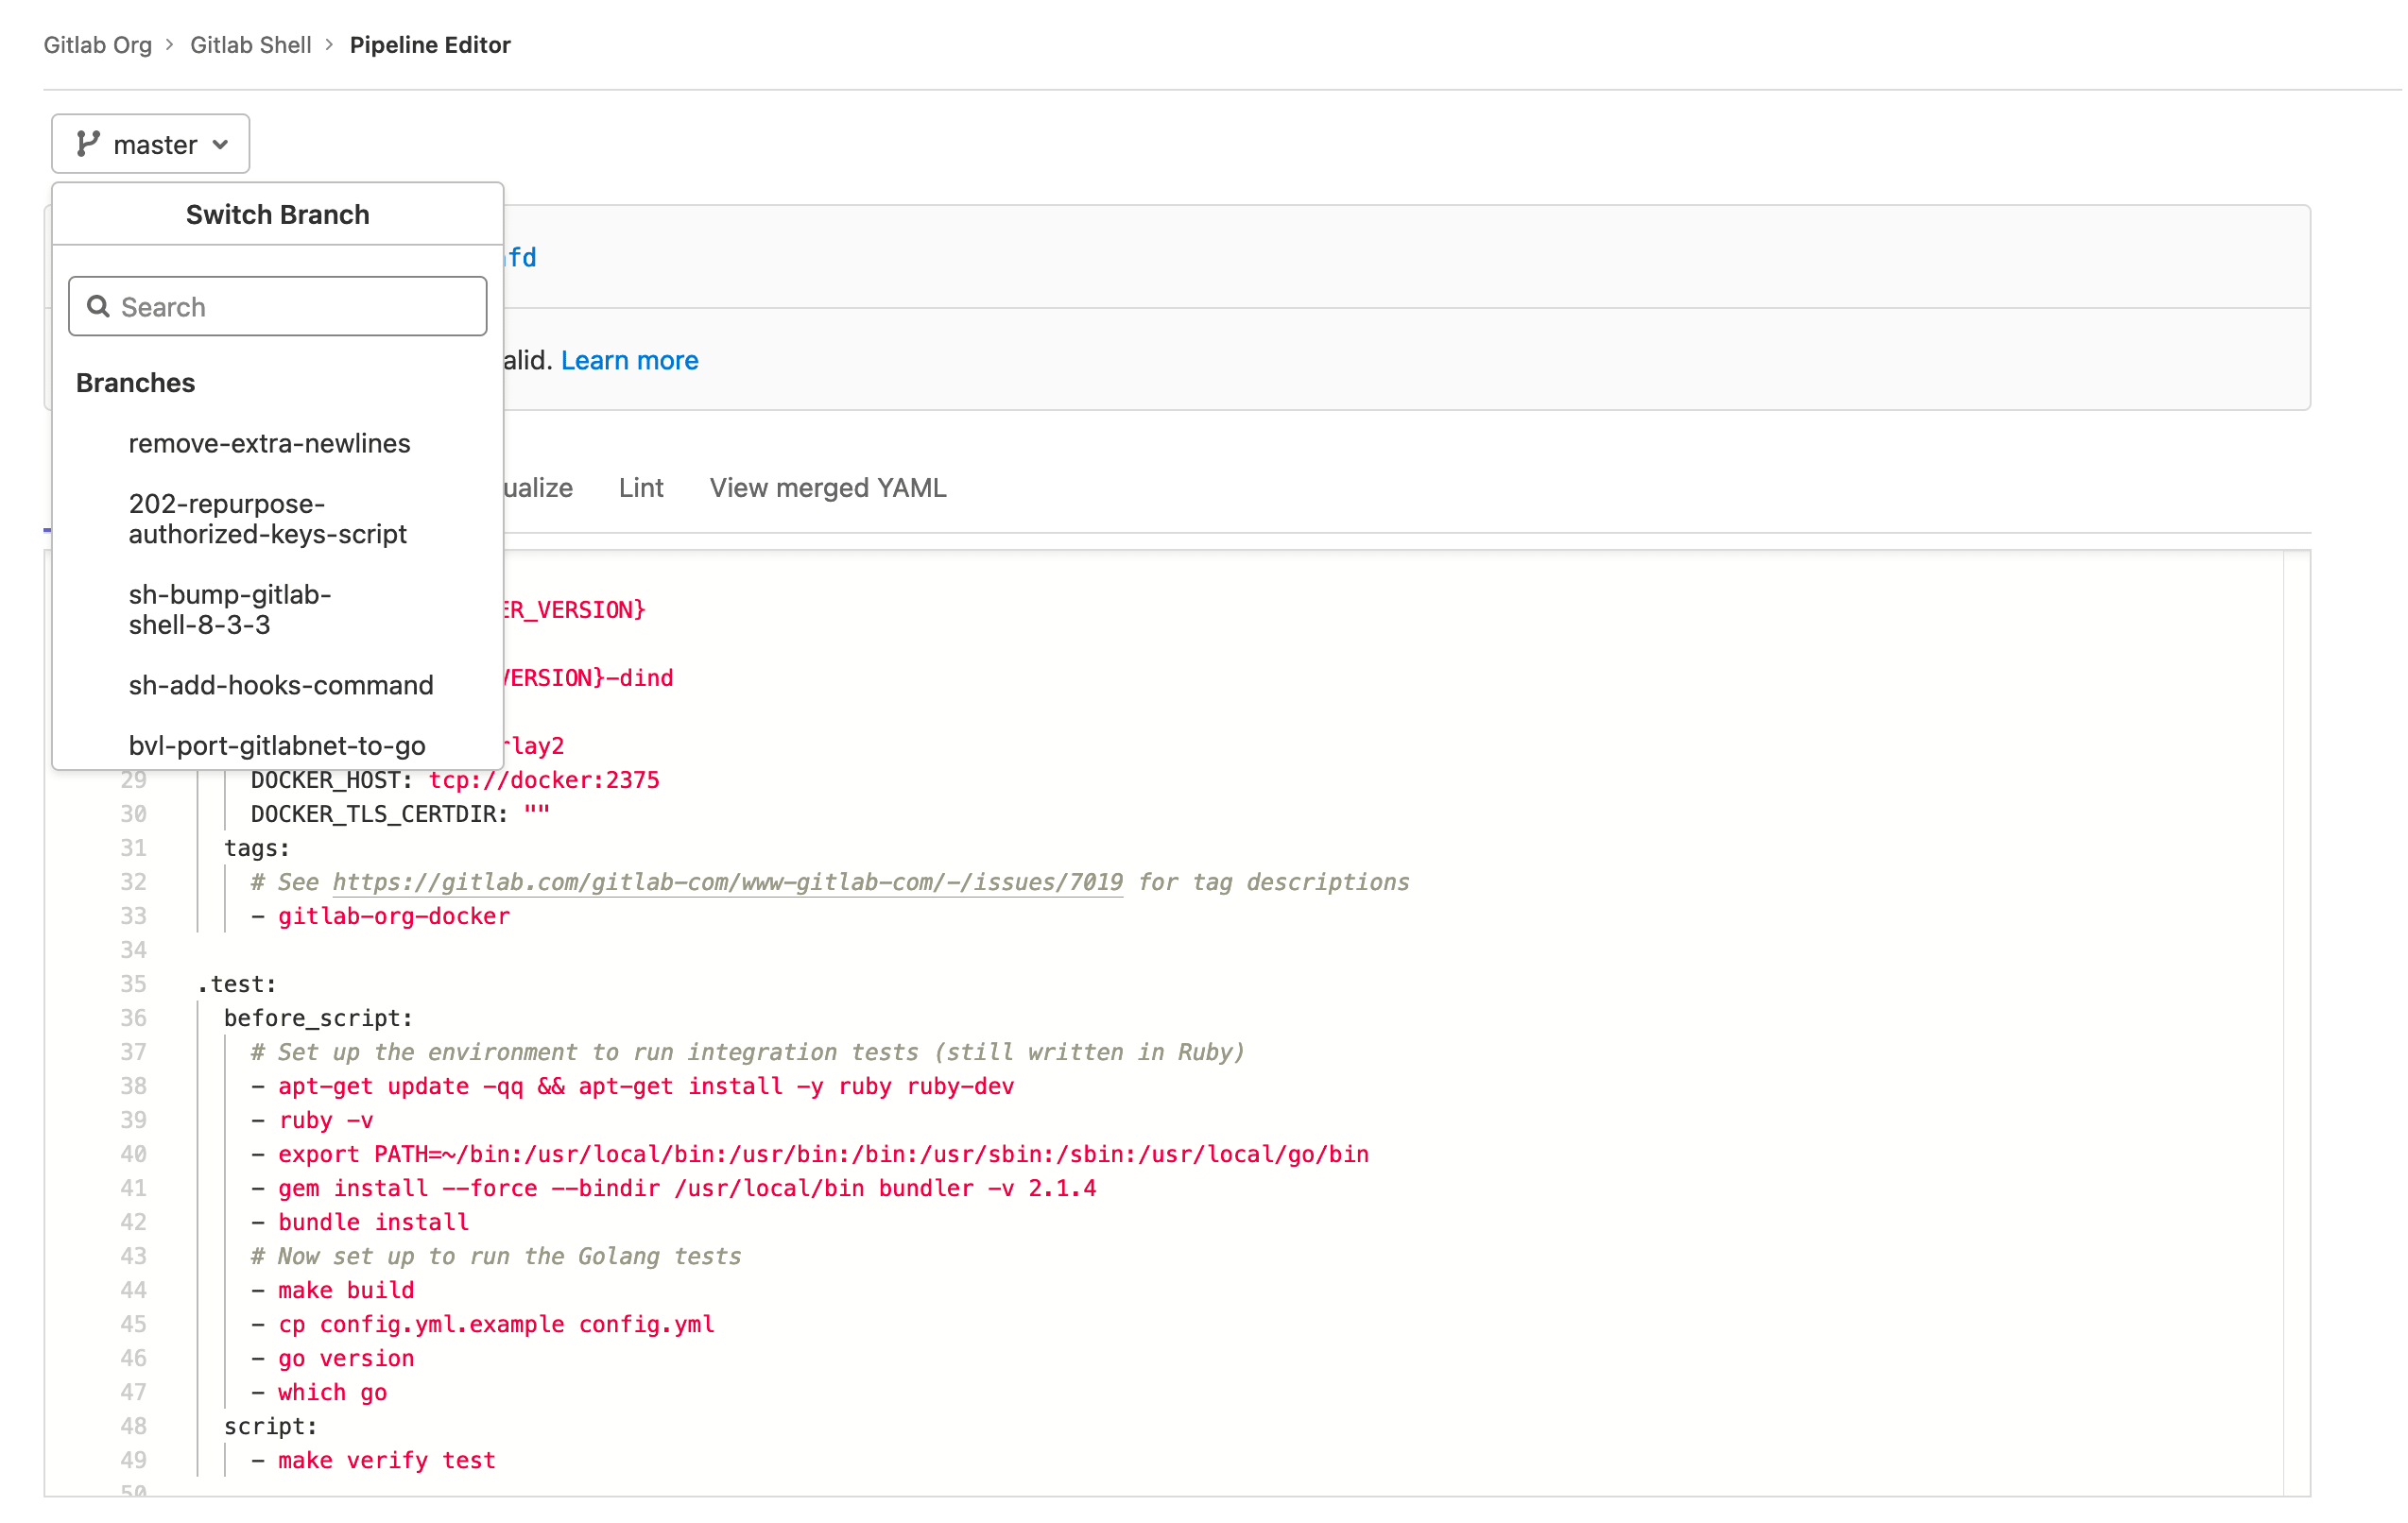 Work from branches in the Pipeline Editor